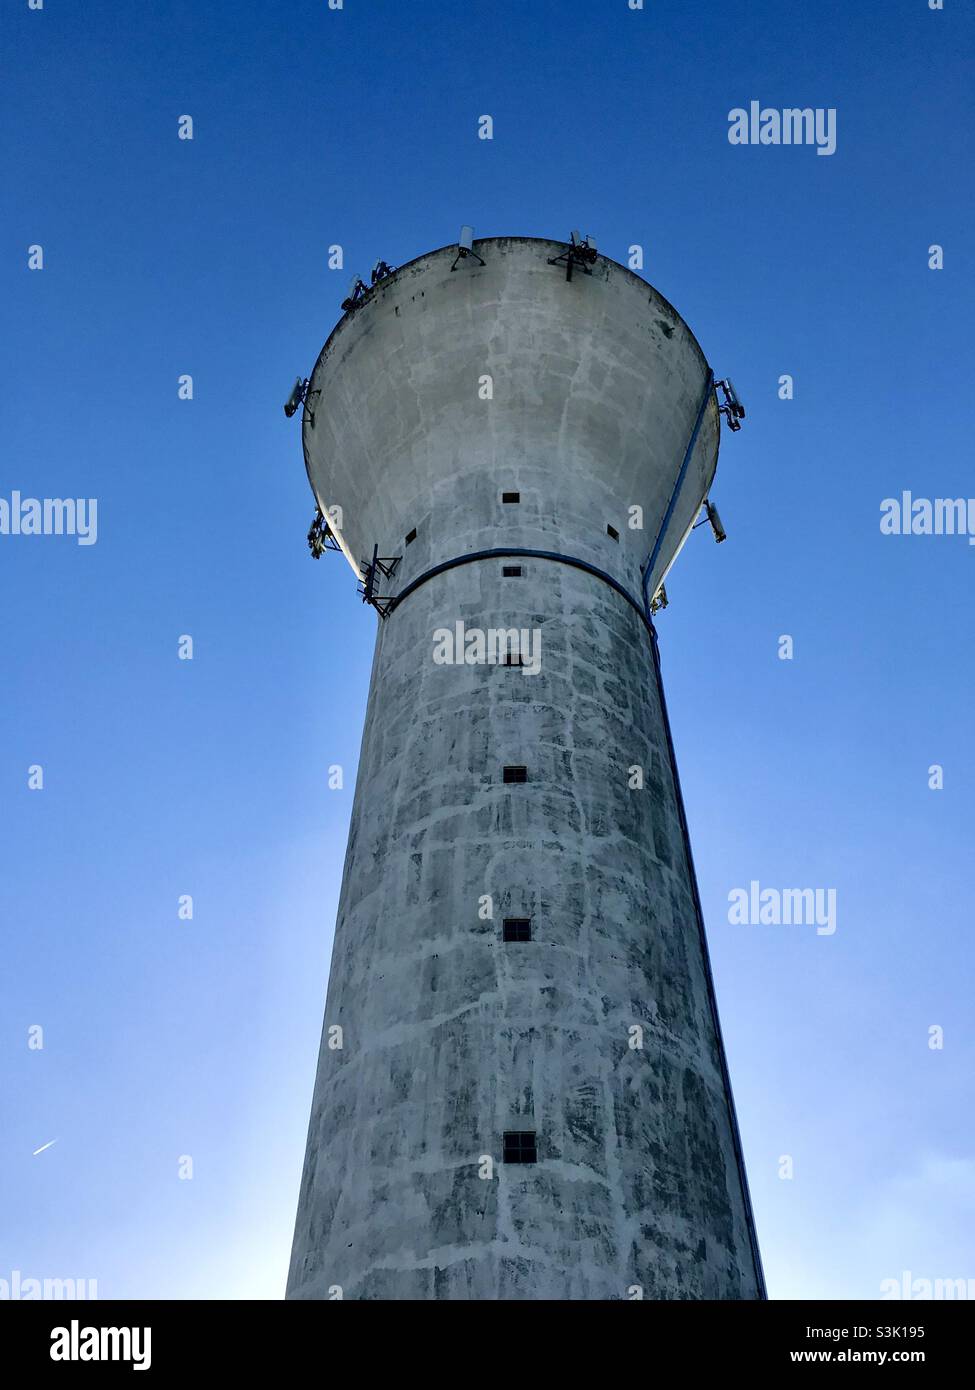 Old water tower with radio and cell phone masts, against clear blue sky. Les Yvelines, France. Stock Photo